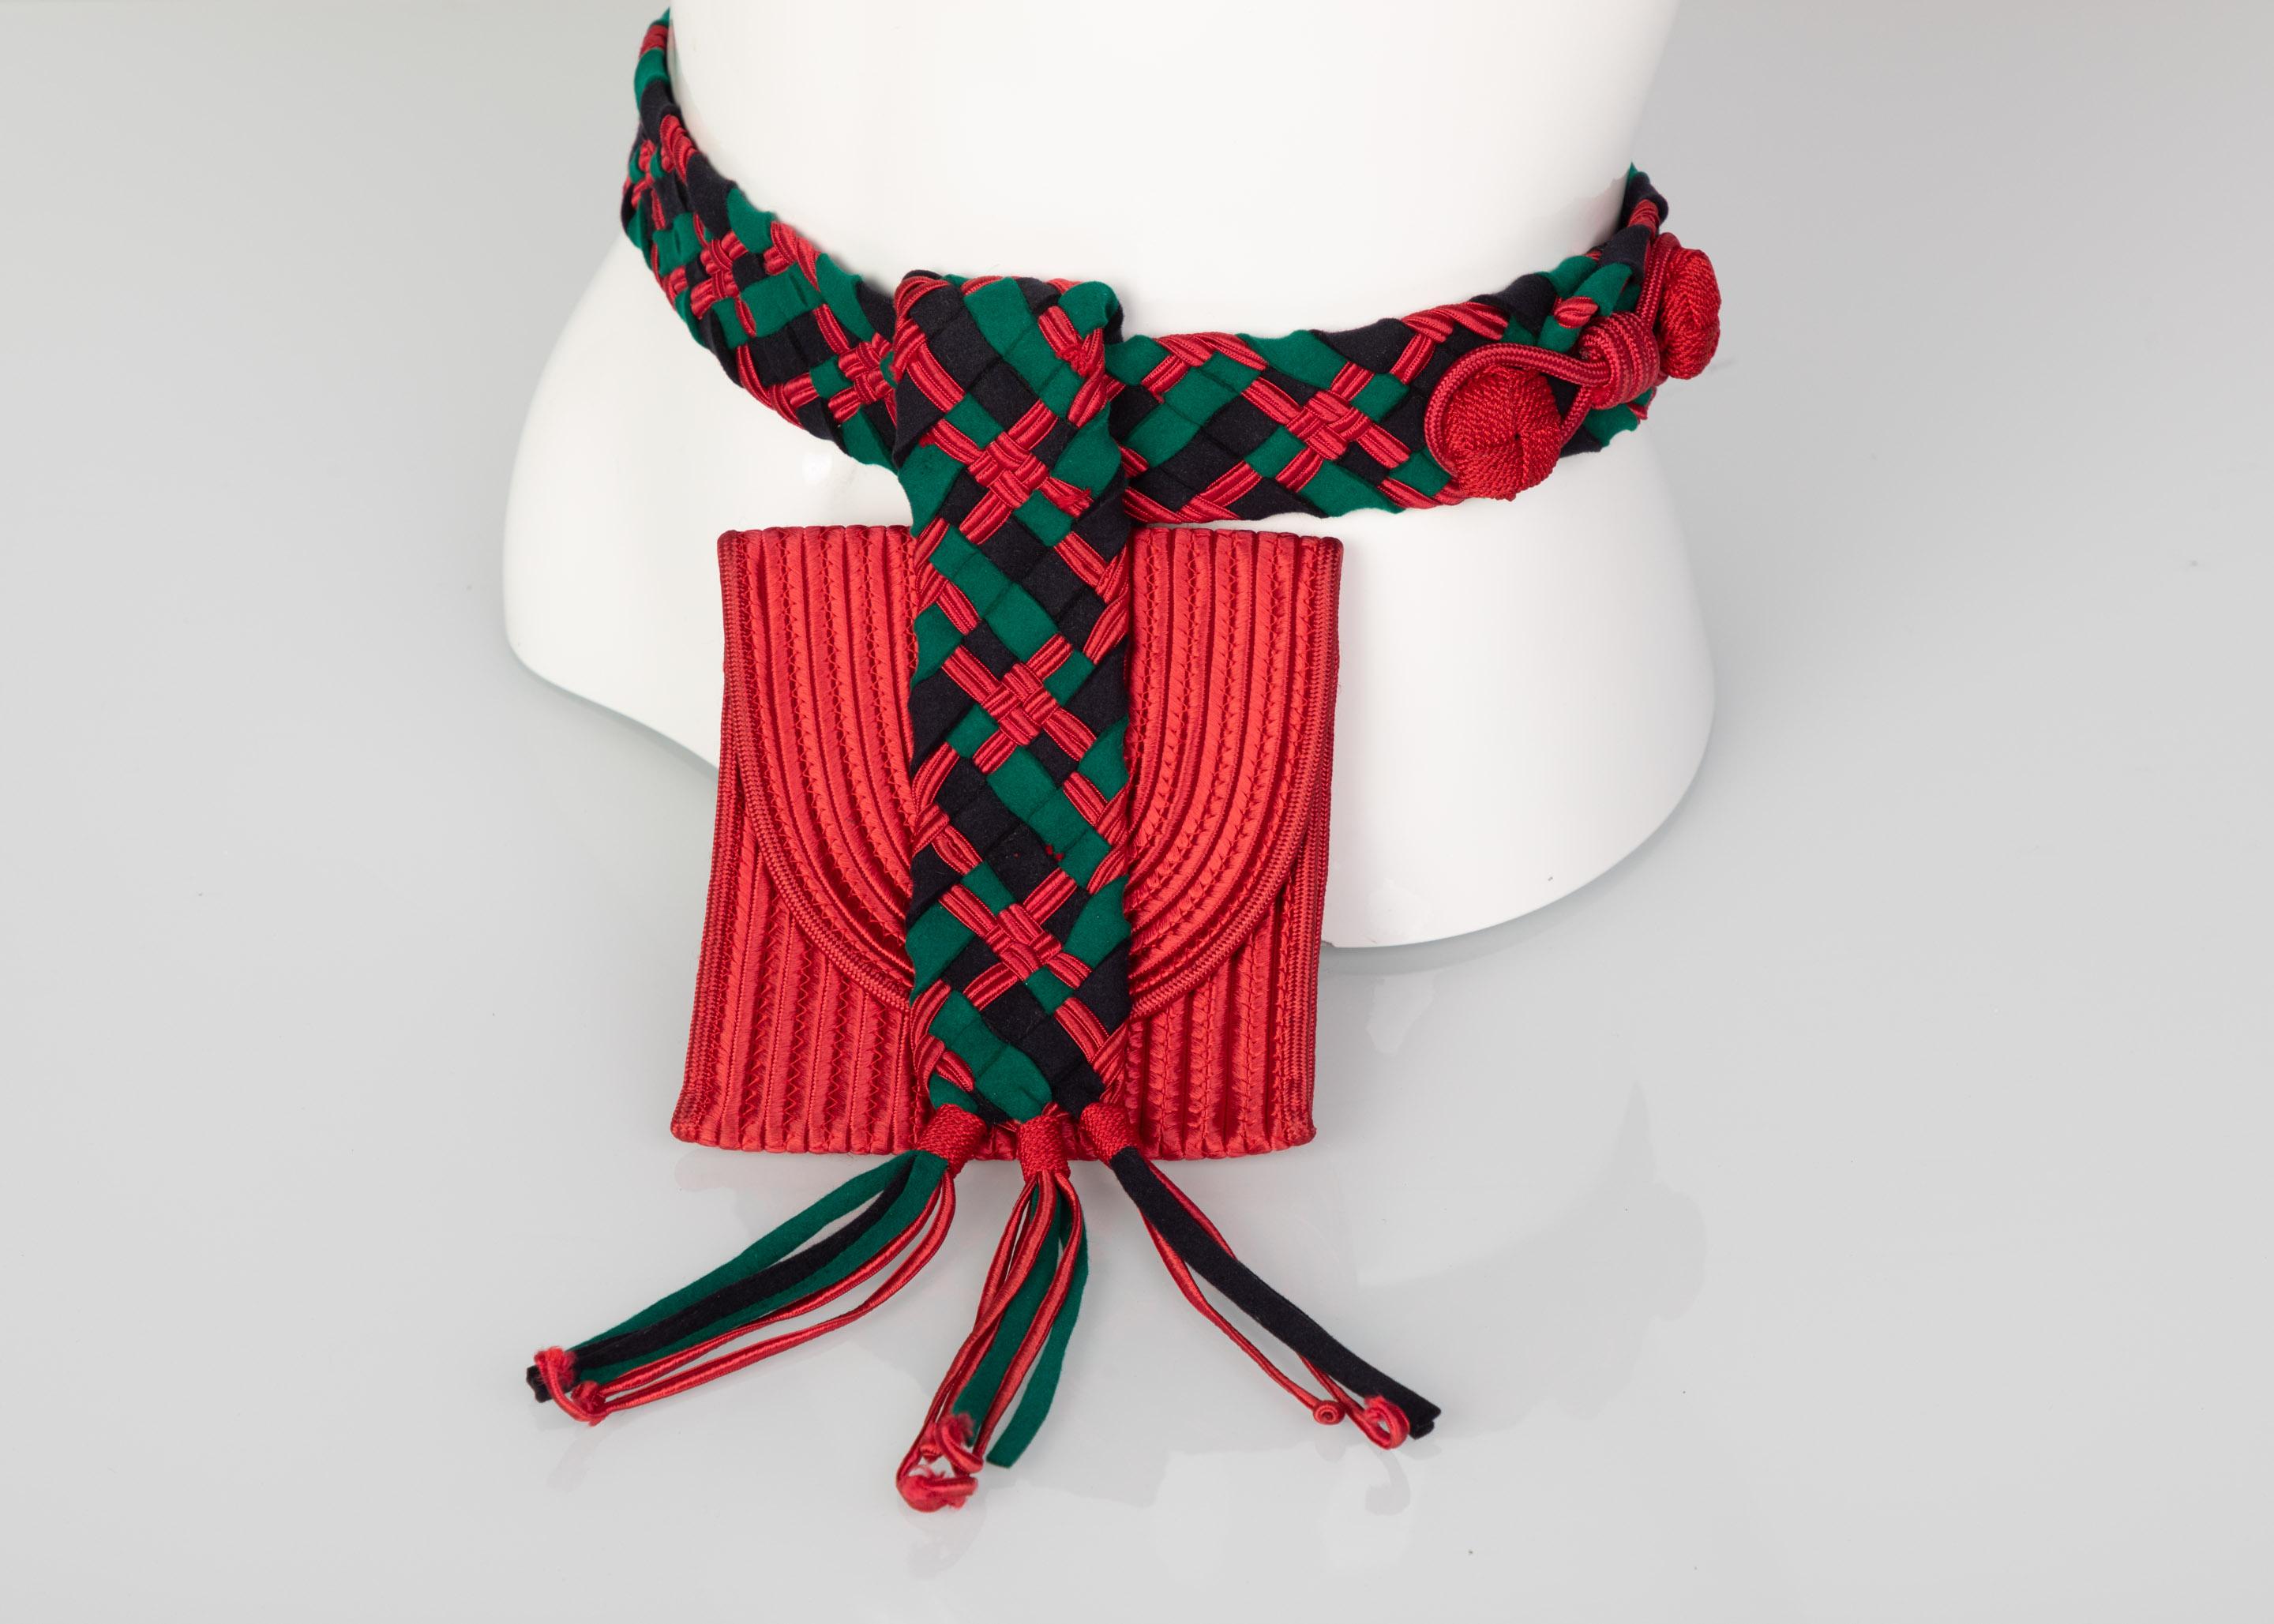 Passementerie accessories are a staple to early YSL collections. The craftsmanship of these designs allows for an exciting way to bring together interesting color combos and provides a simple way to elevate an ensemble. This 1990s YSL belt bag is